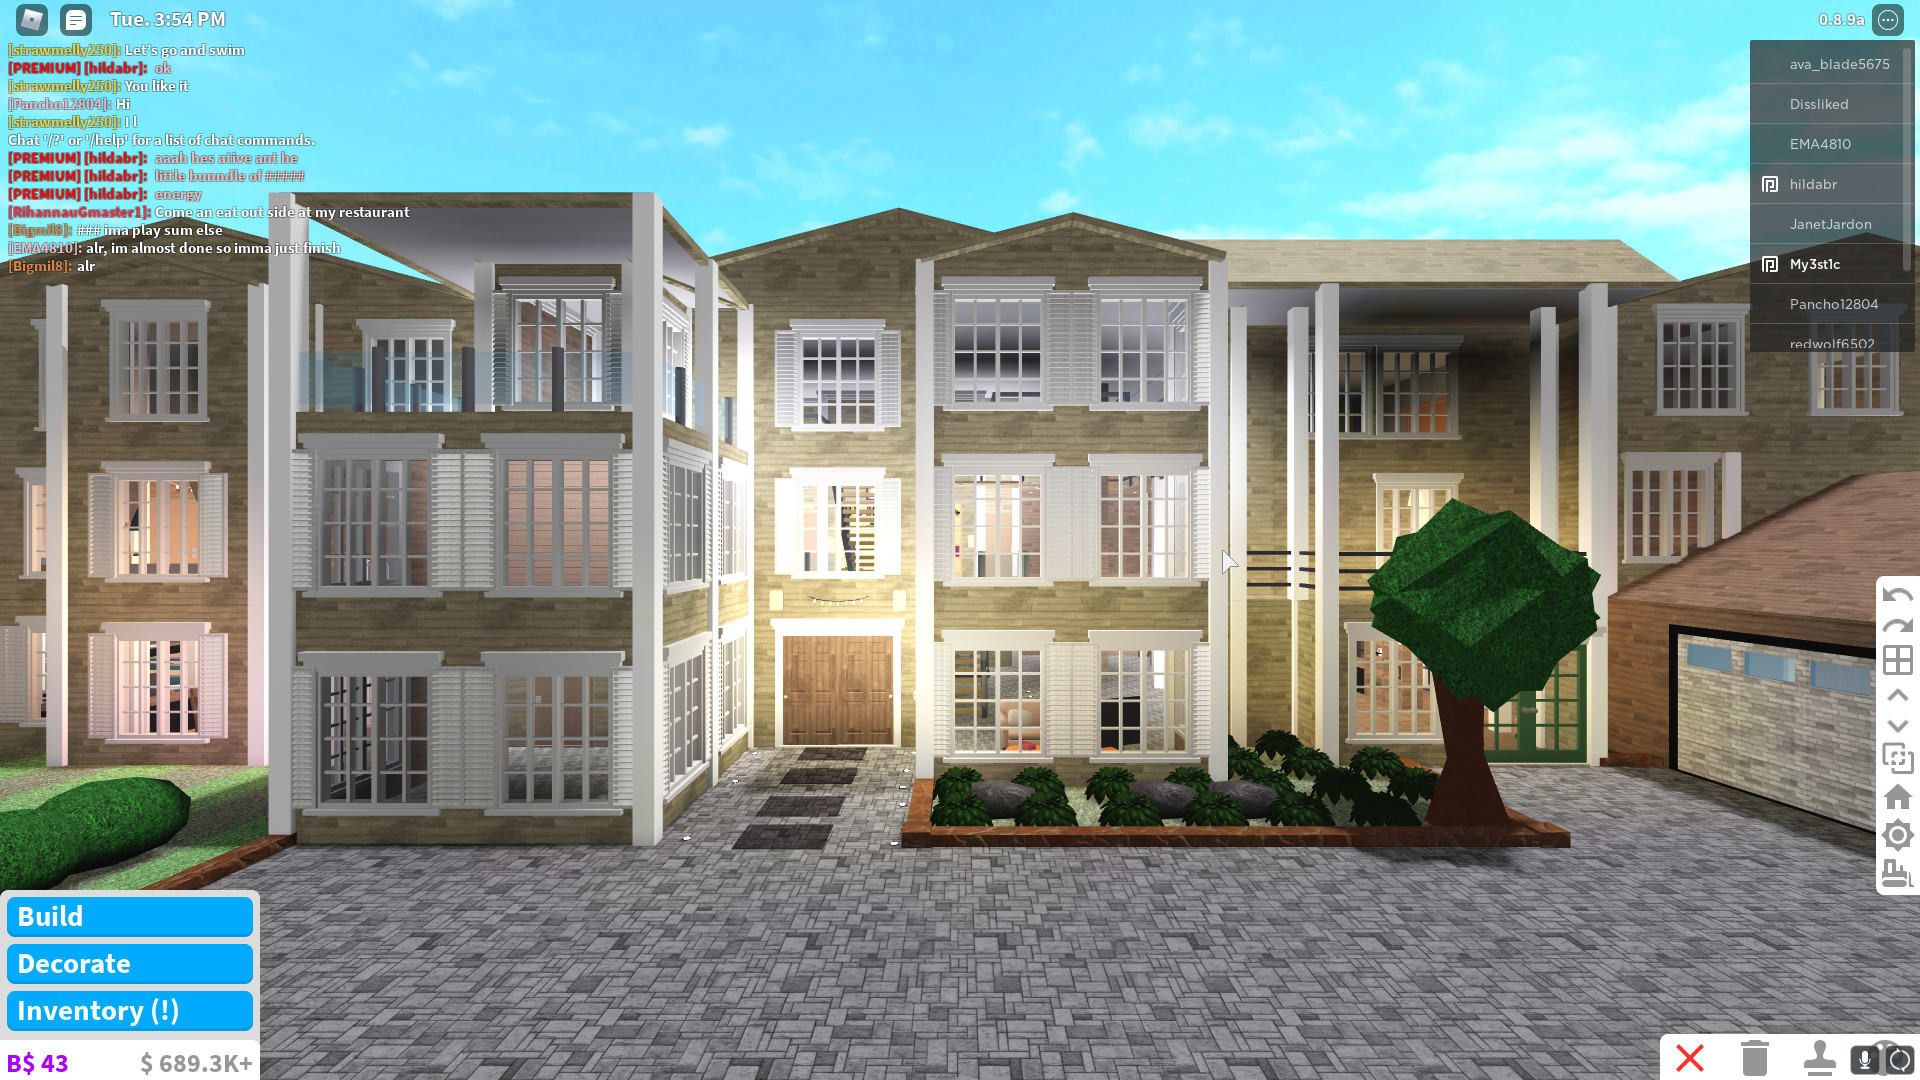 Build You A Dream House Or Mansion In Roblox Bloxburg By Omegawafrgaming - roblox bloxburg houses 3k